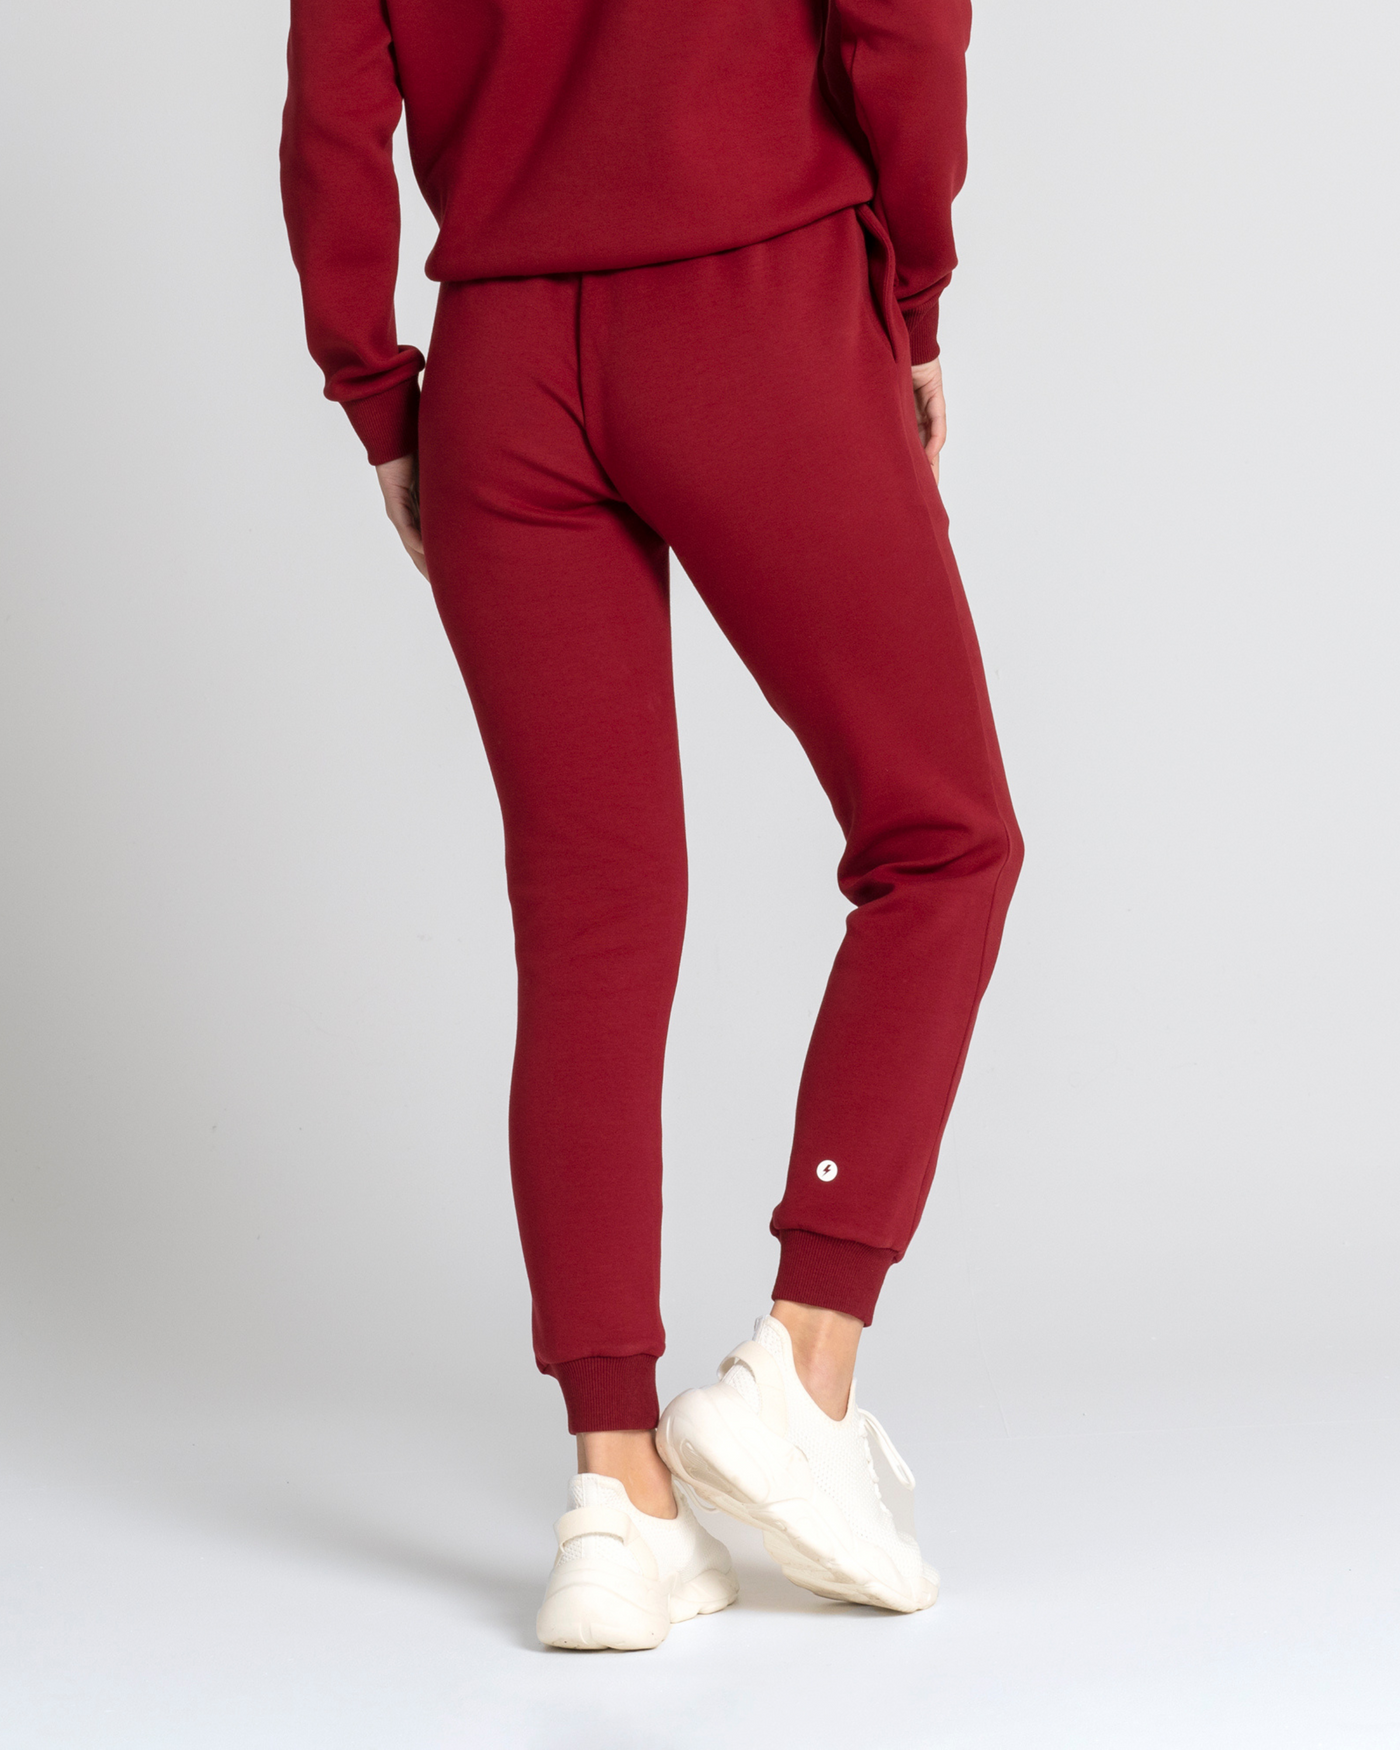 CASUALS Women's Jogger Ruby